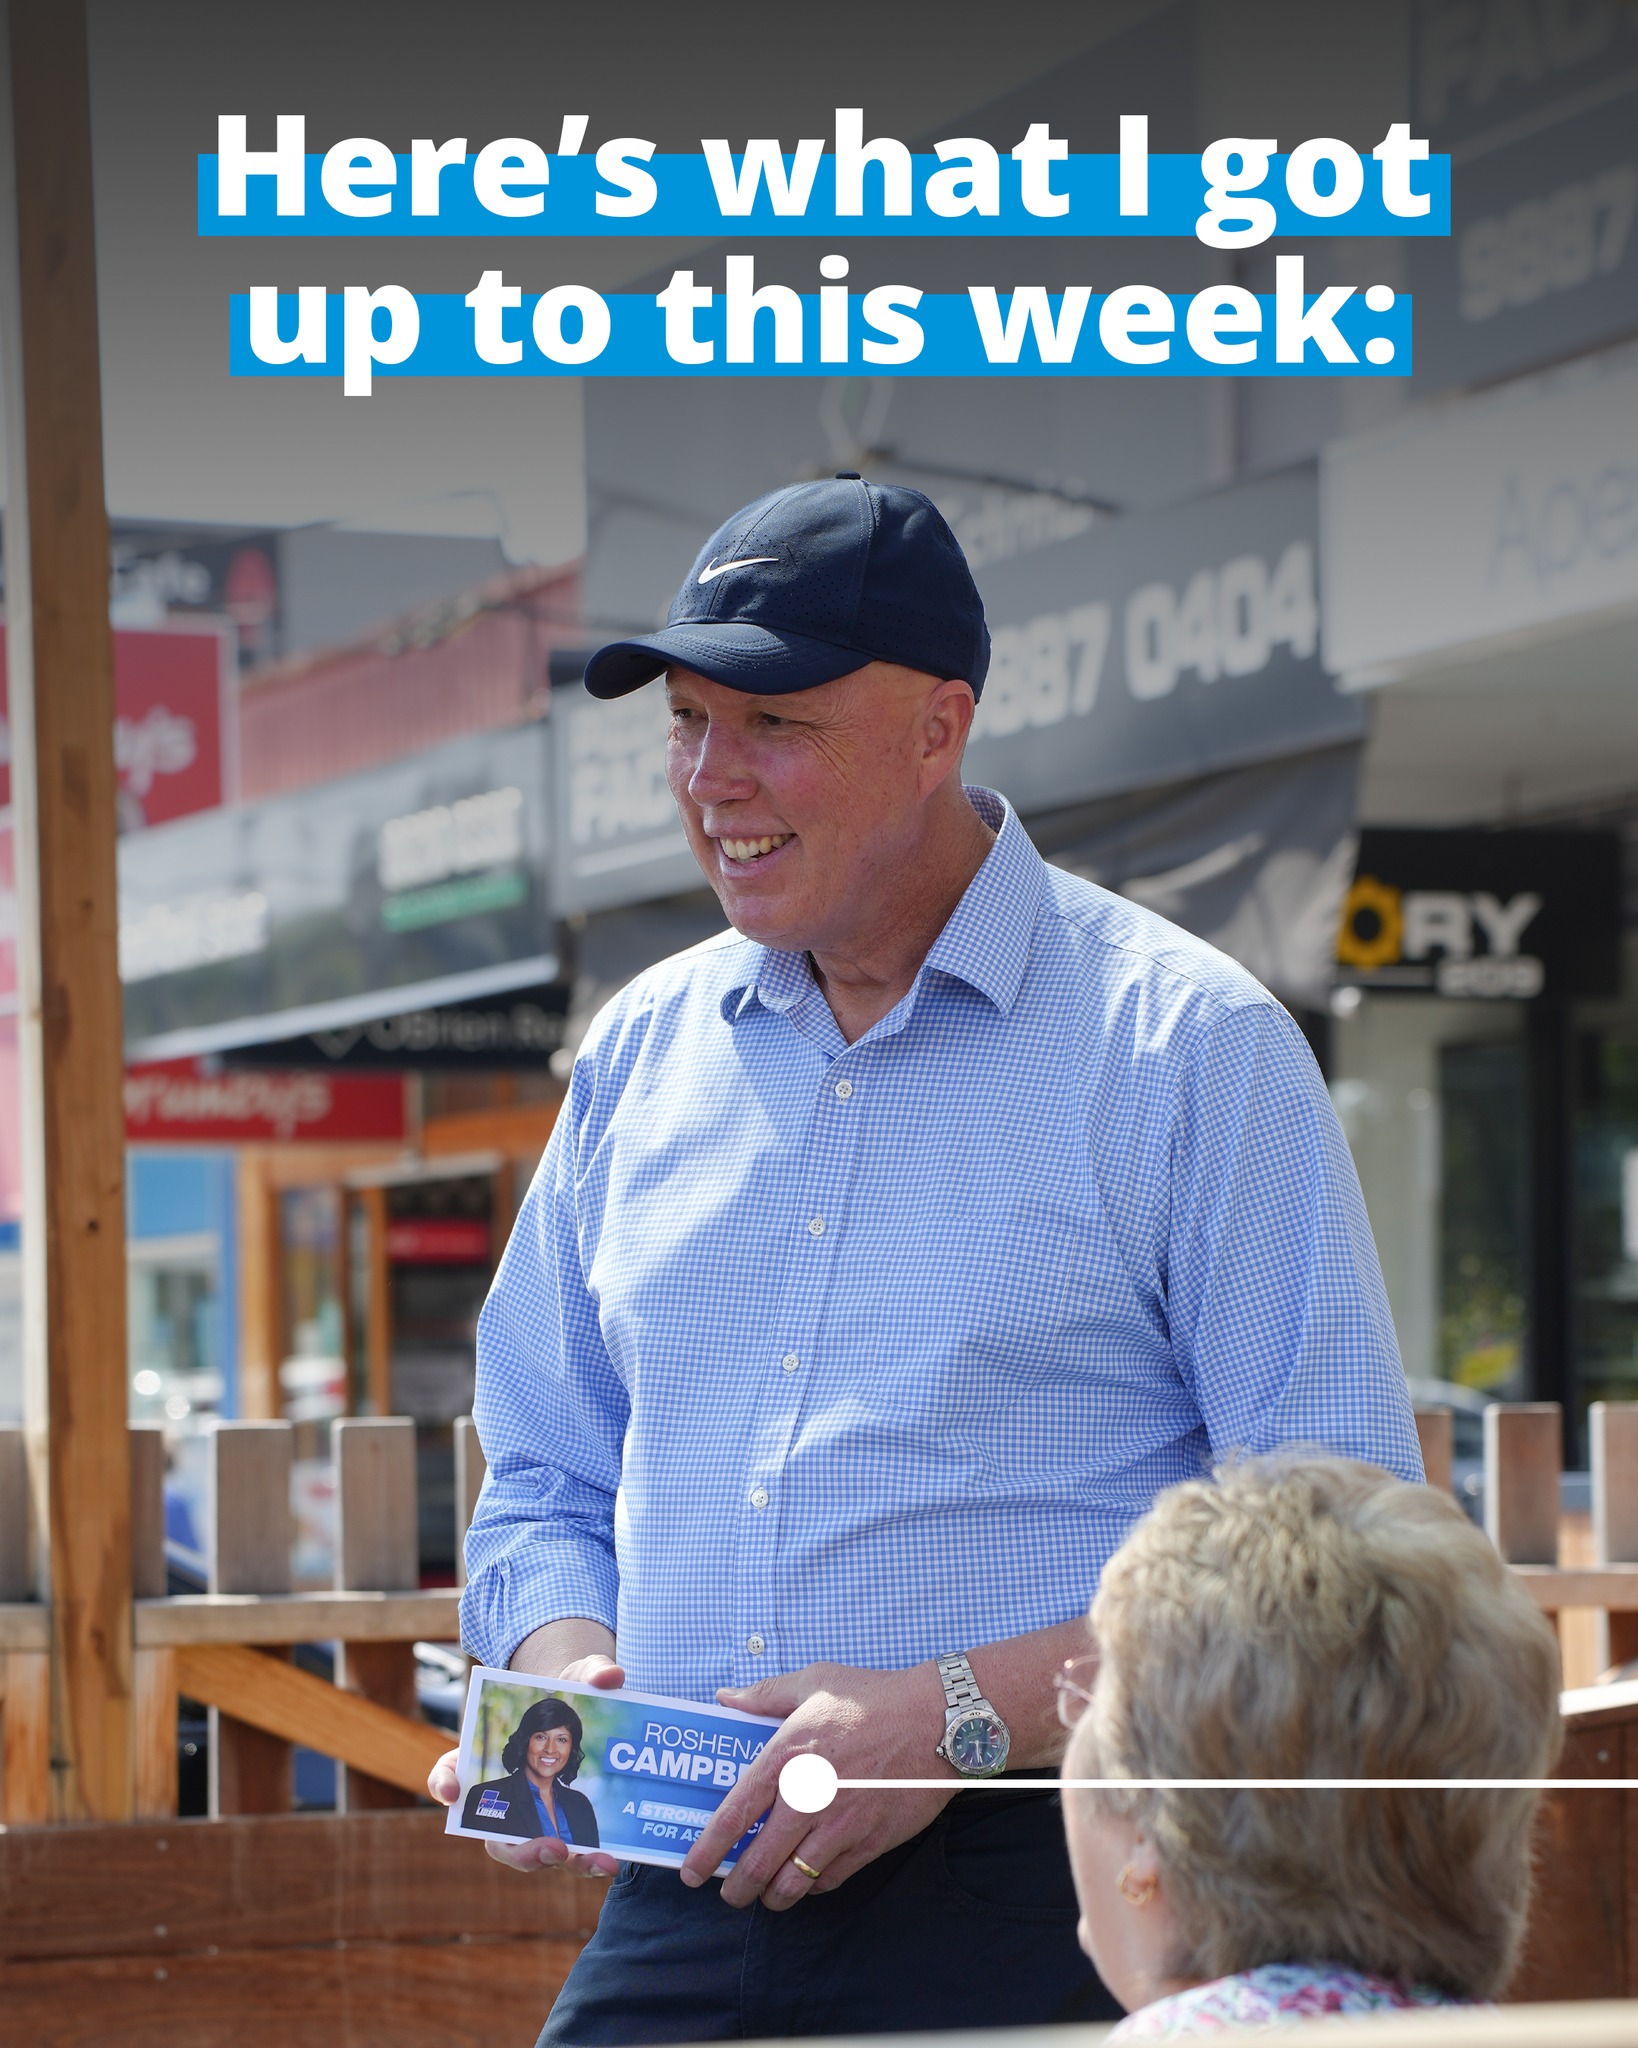 Peter Dutton: It’s been another busy week listening to Australians right across…